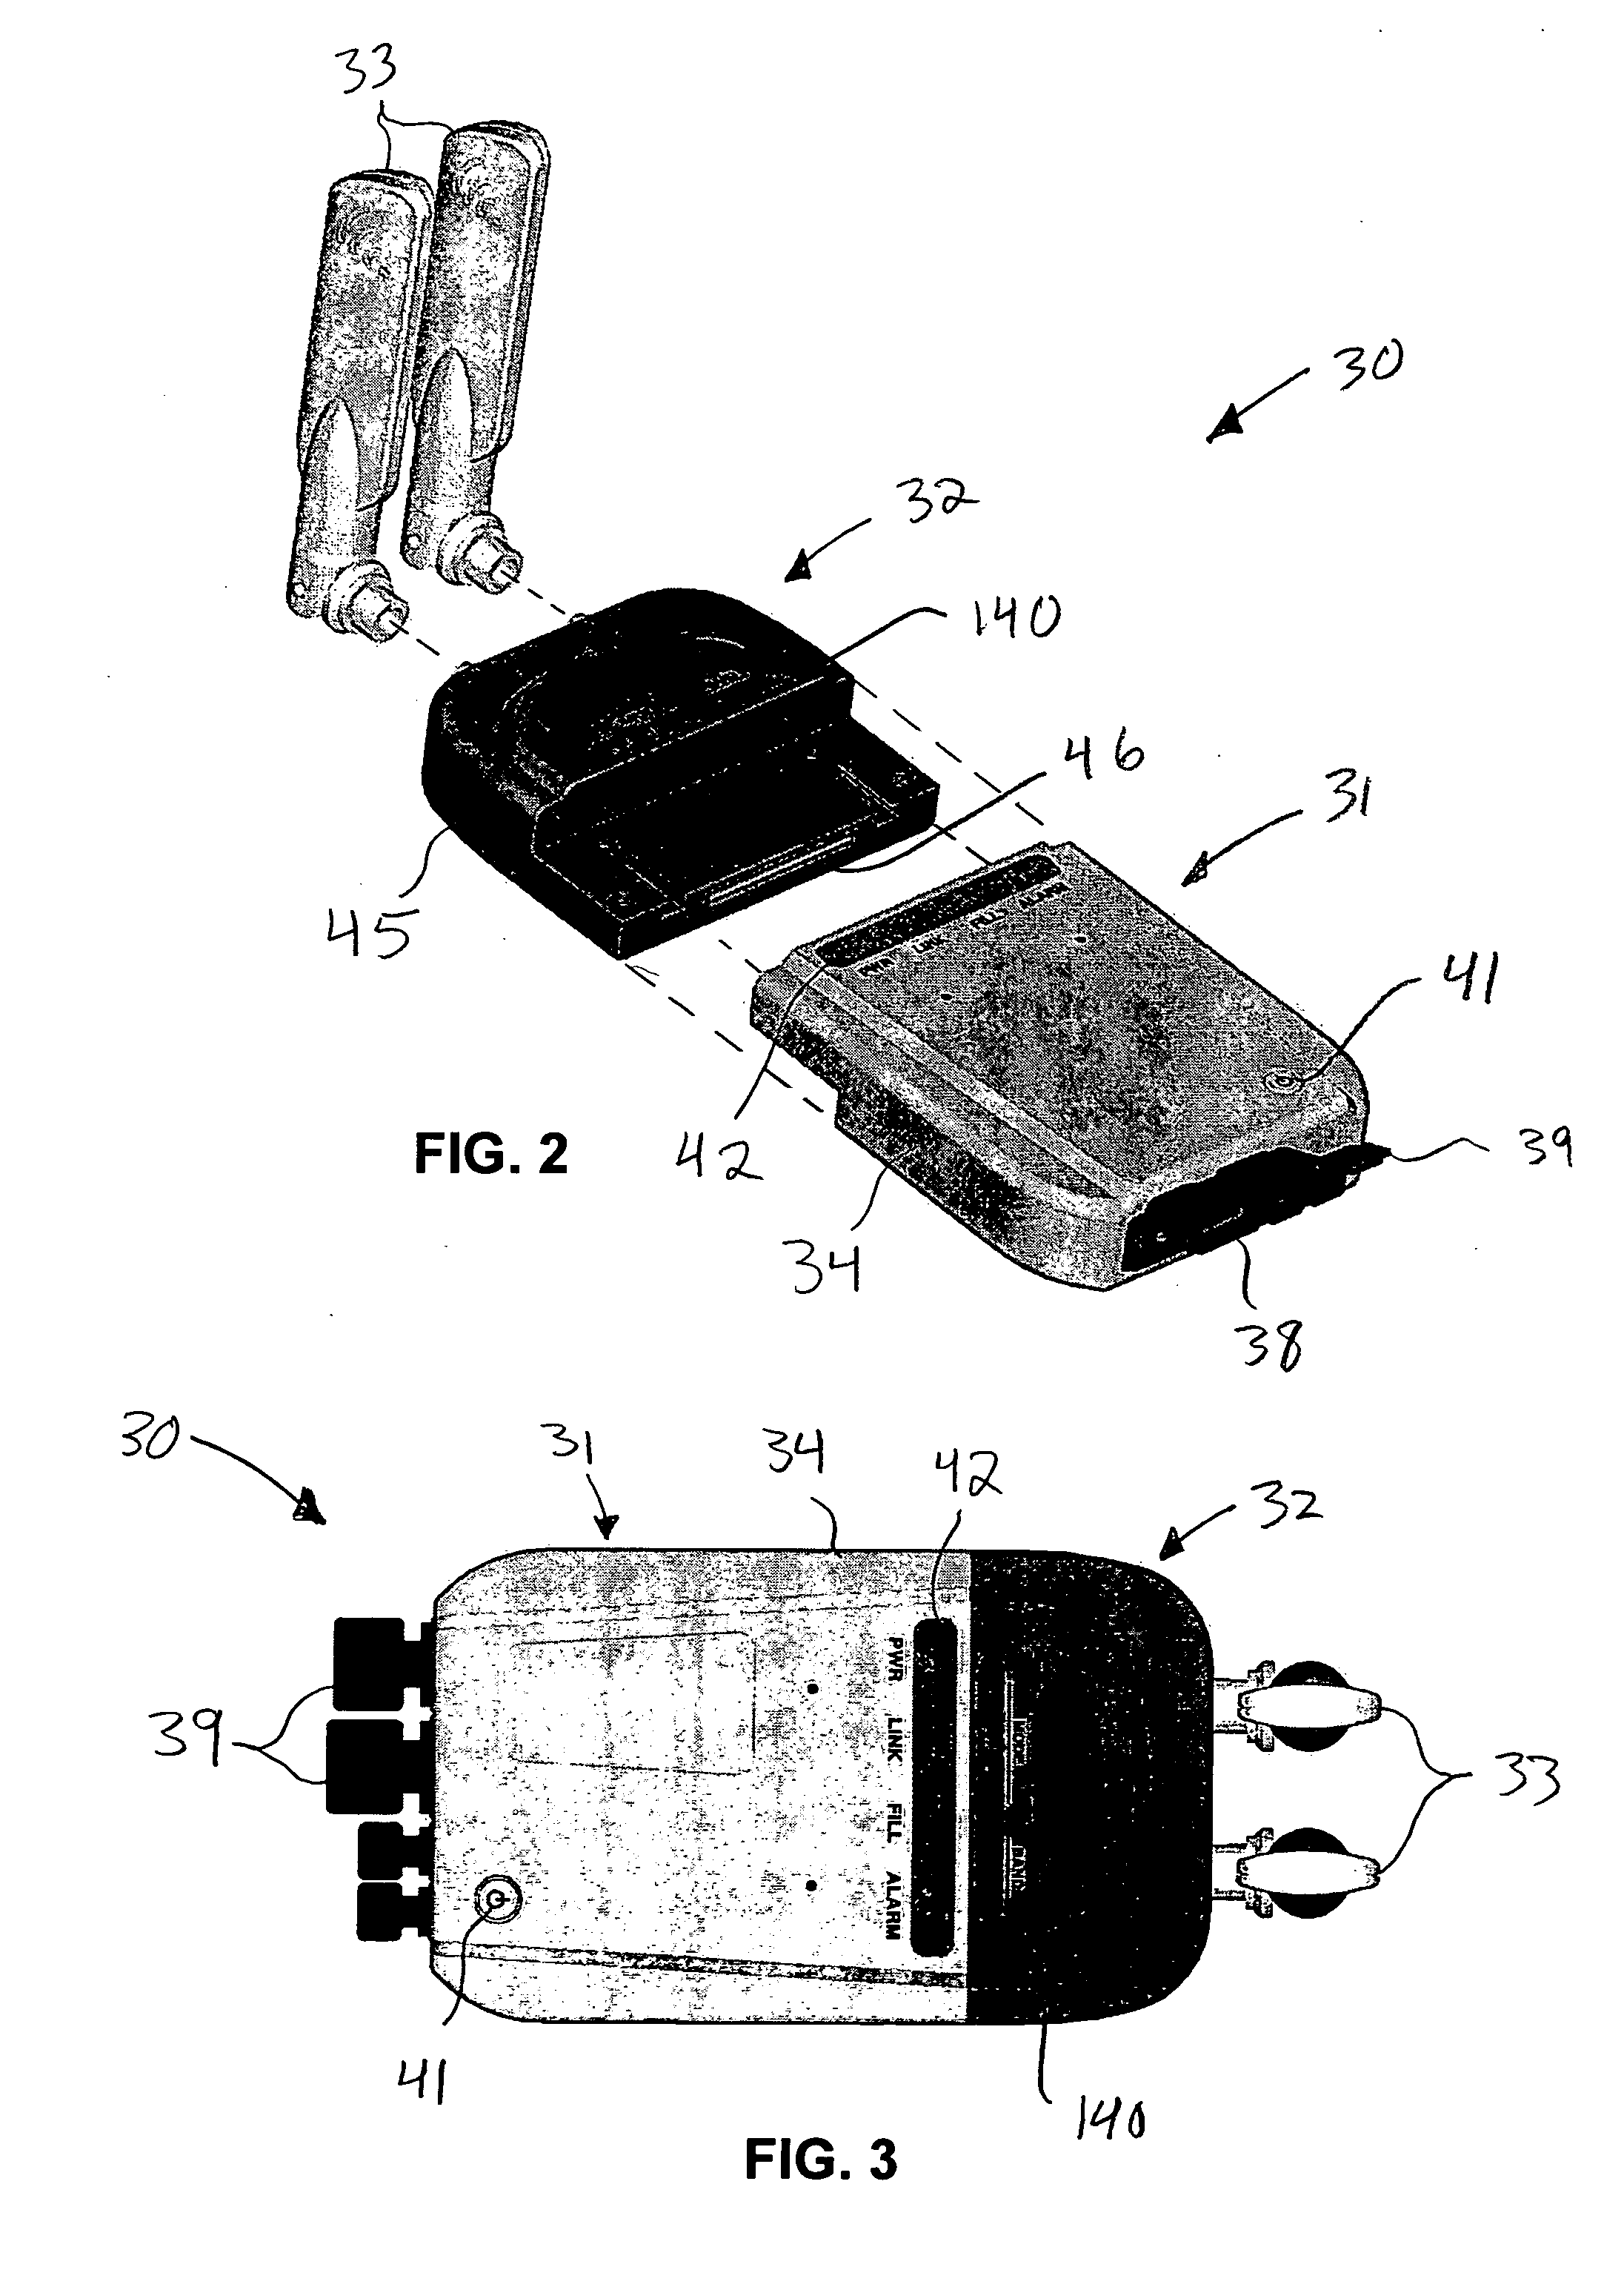 Modular cryptographic device providing enhanced interface protocol features and related methods